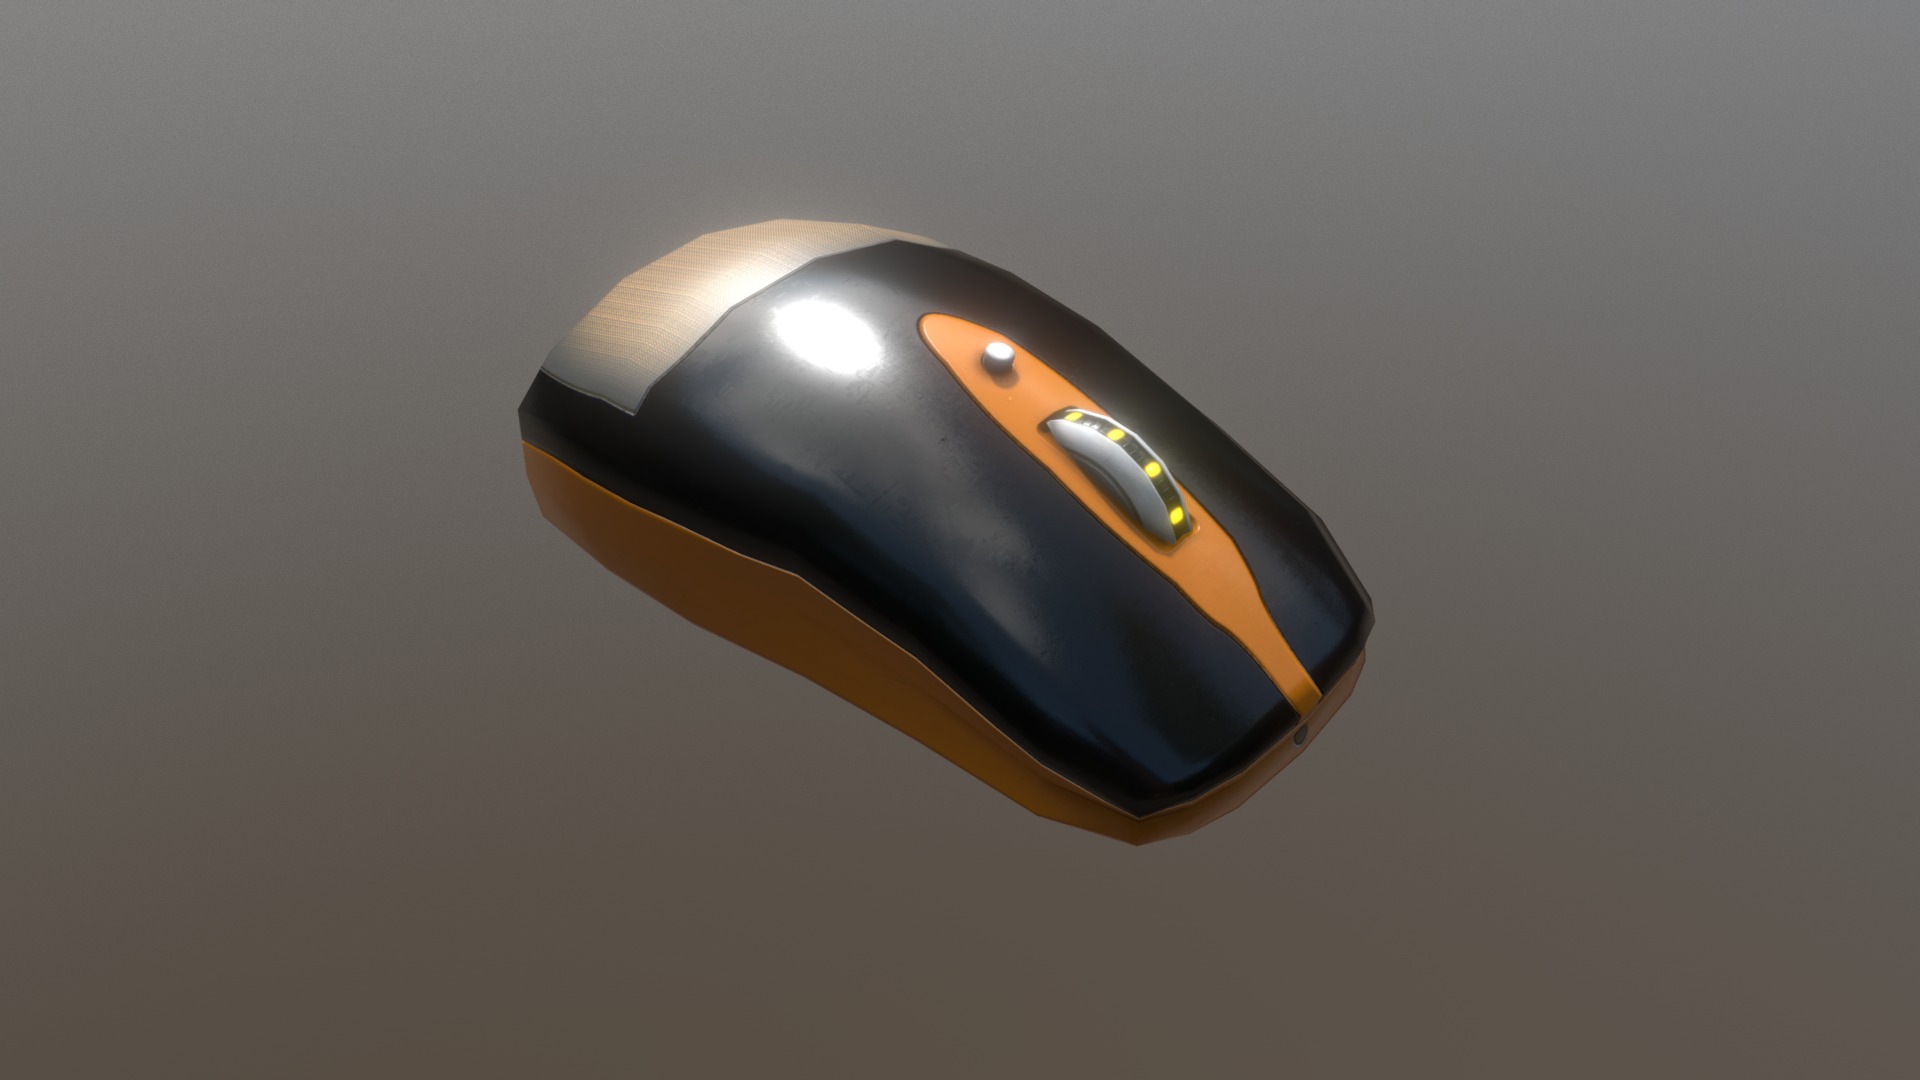 3D model Computer mouse - This is a 3D model of the Computer mouse. The 3D model is about a shiny black and gold shiny object.